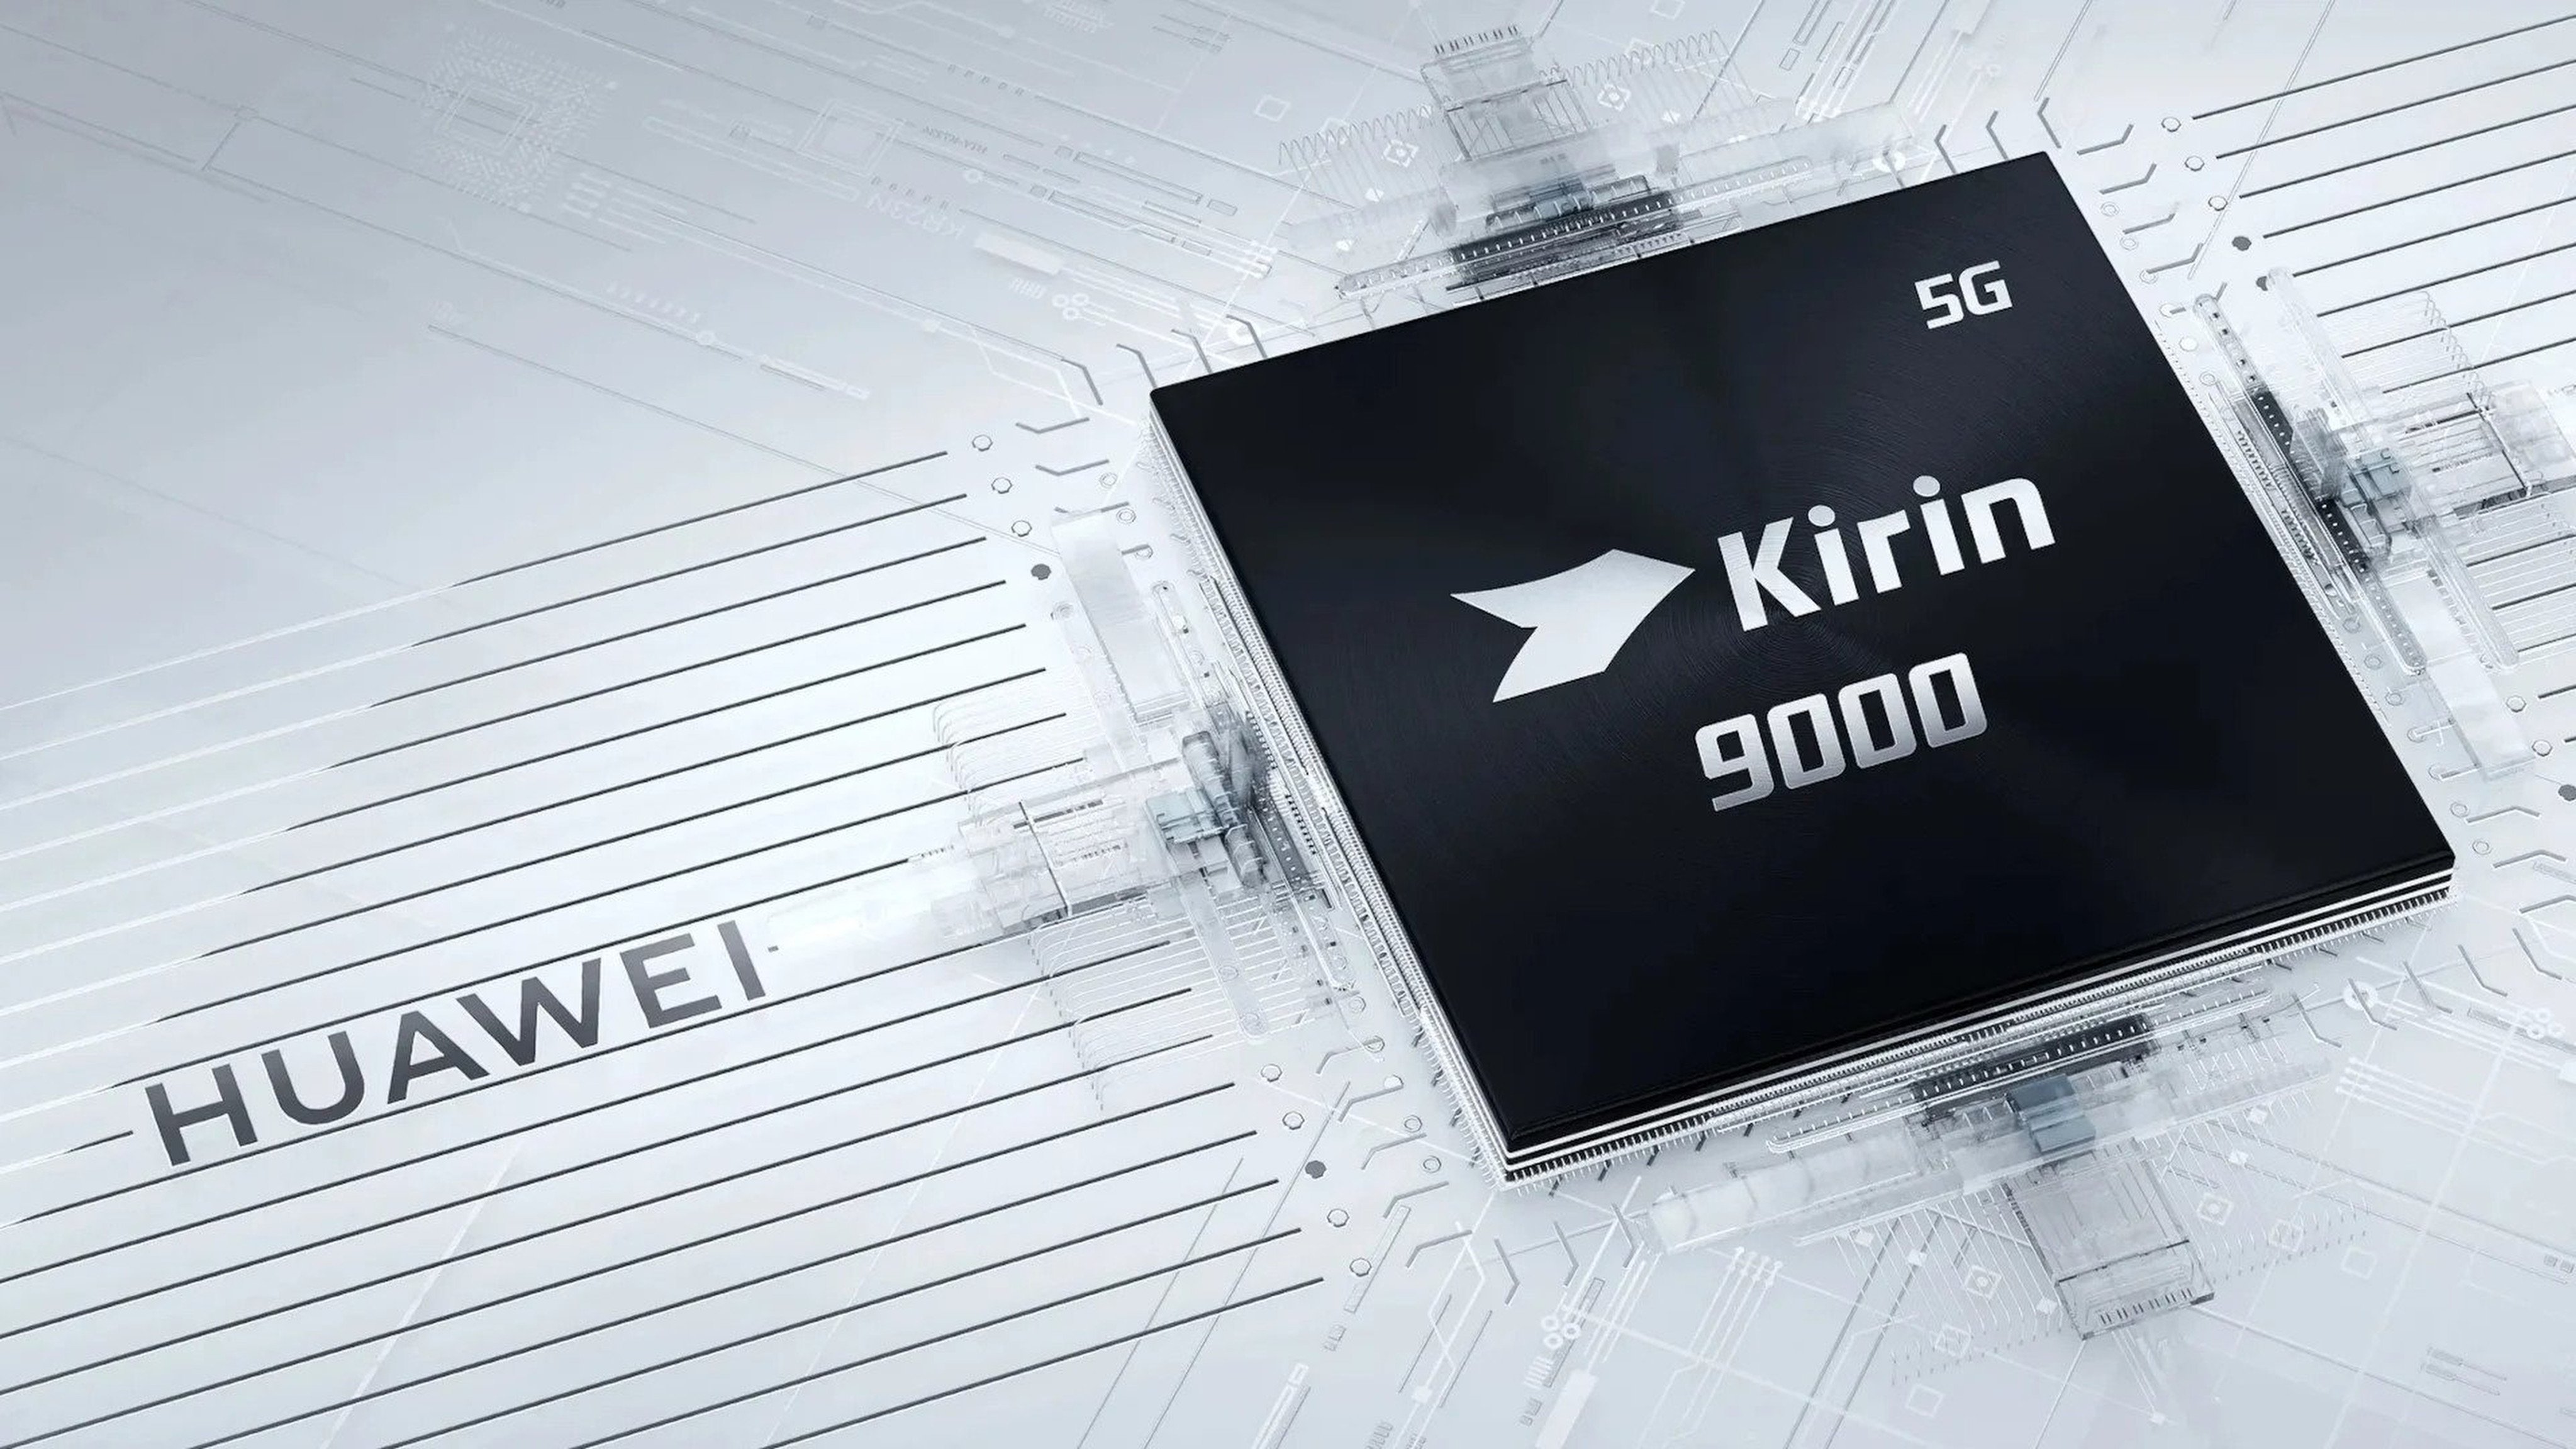 Huawei’s Kirin 9000s processor used in the Mate 60 Pro has led to close scrutiny of how the sanctioned company is advancing its chip designs without access to the most cutting-edge equipment. Photo: Huawei Technologies